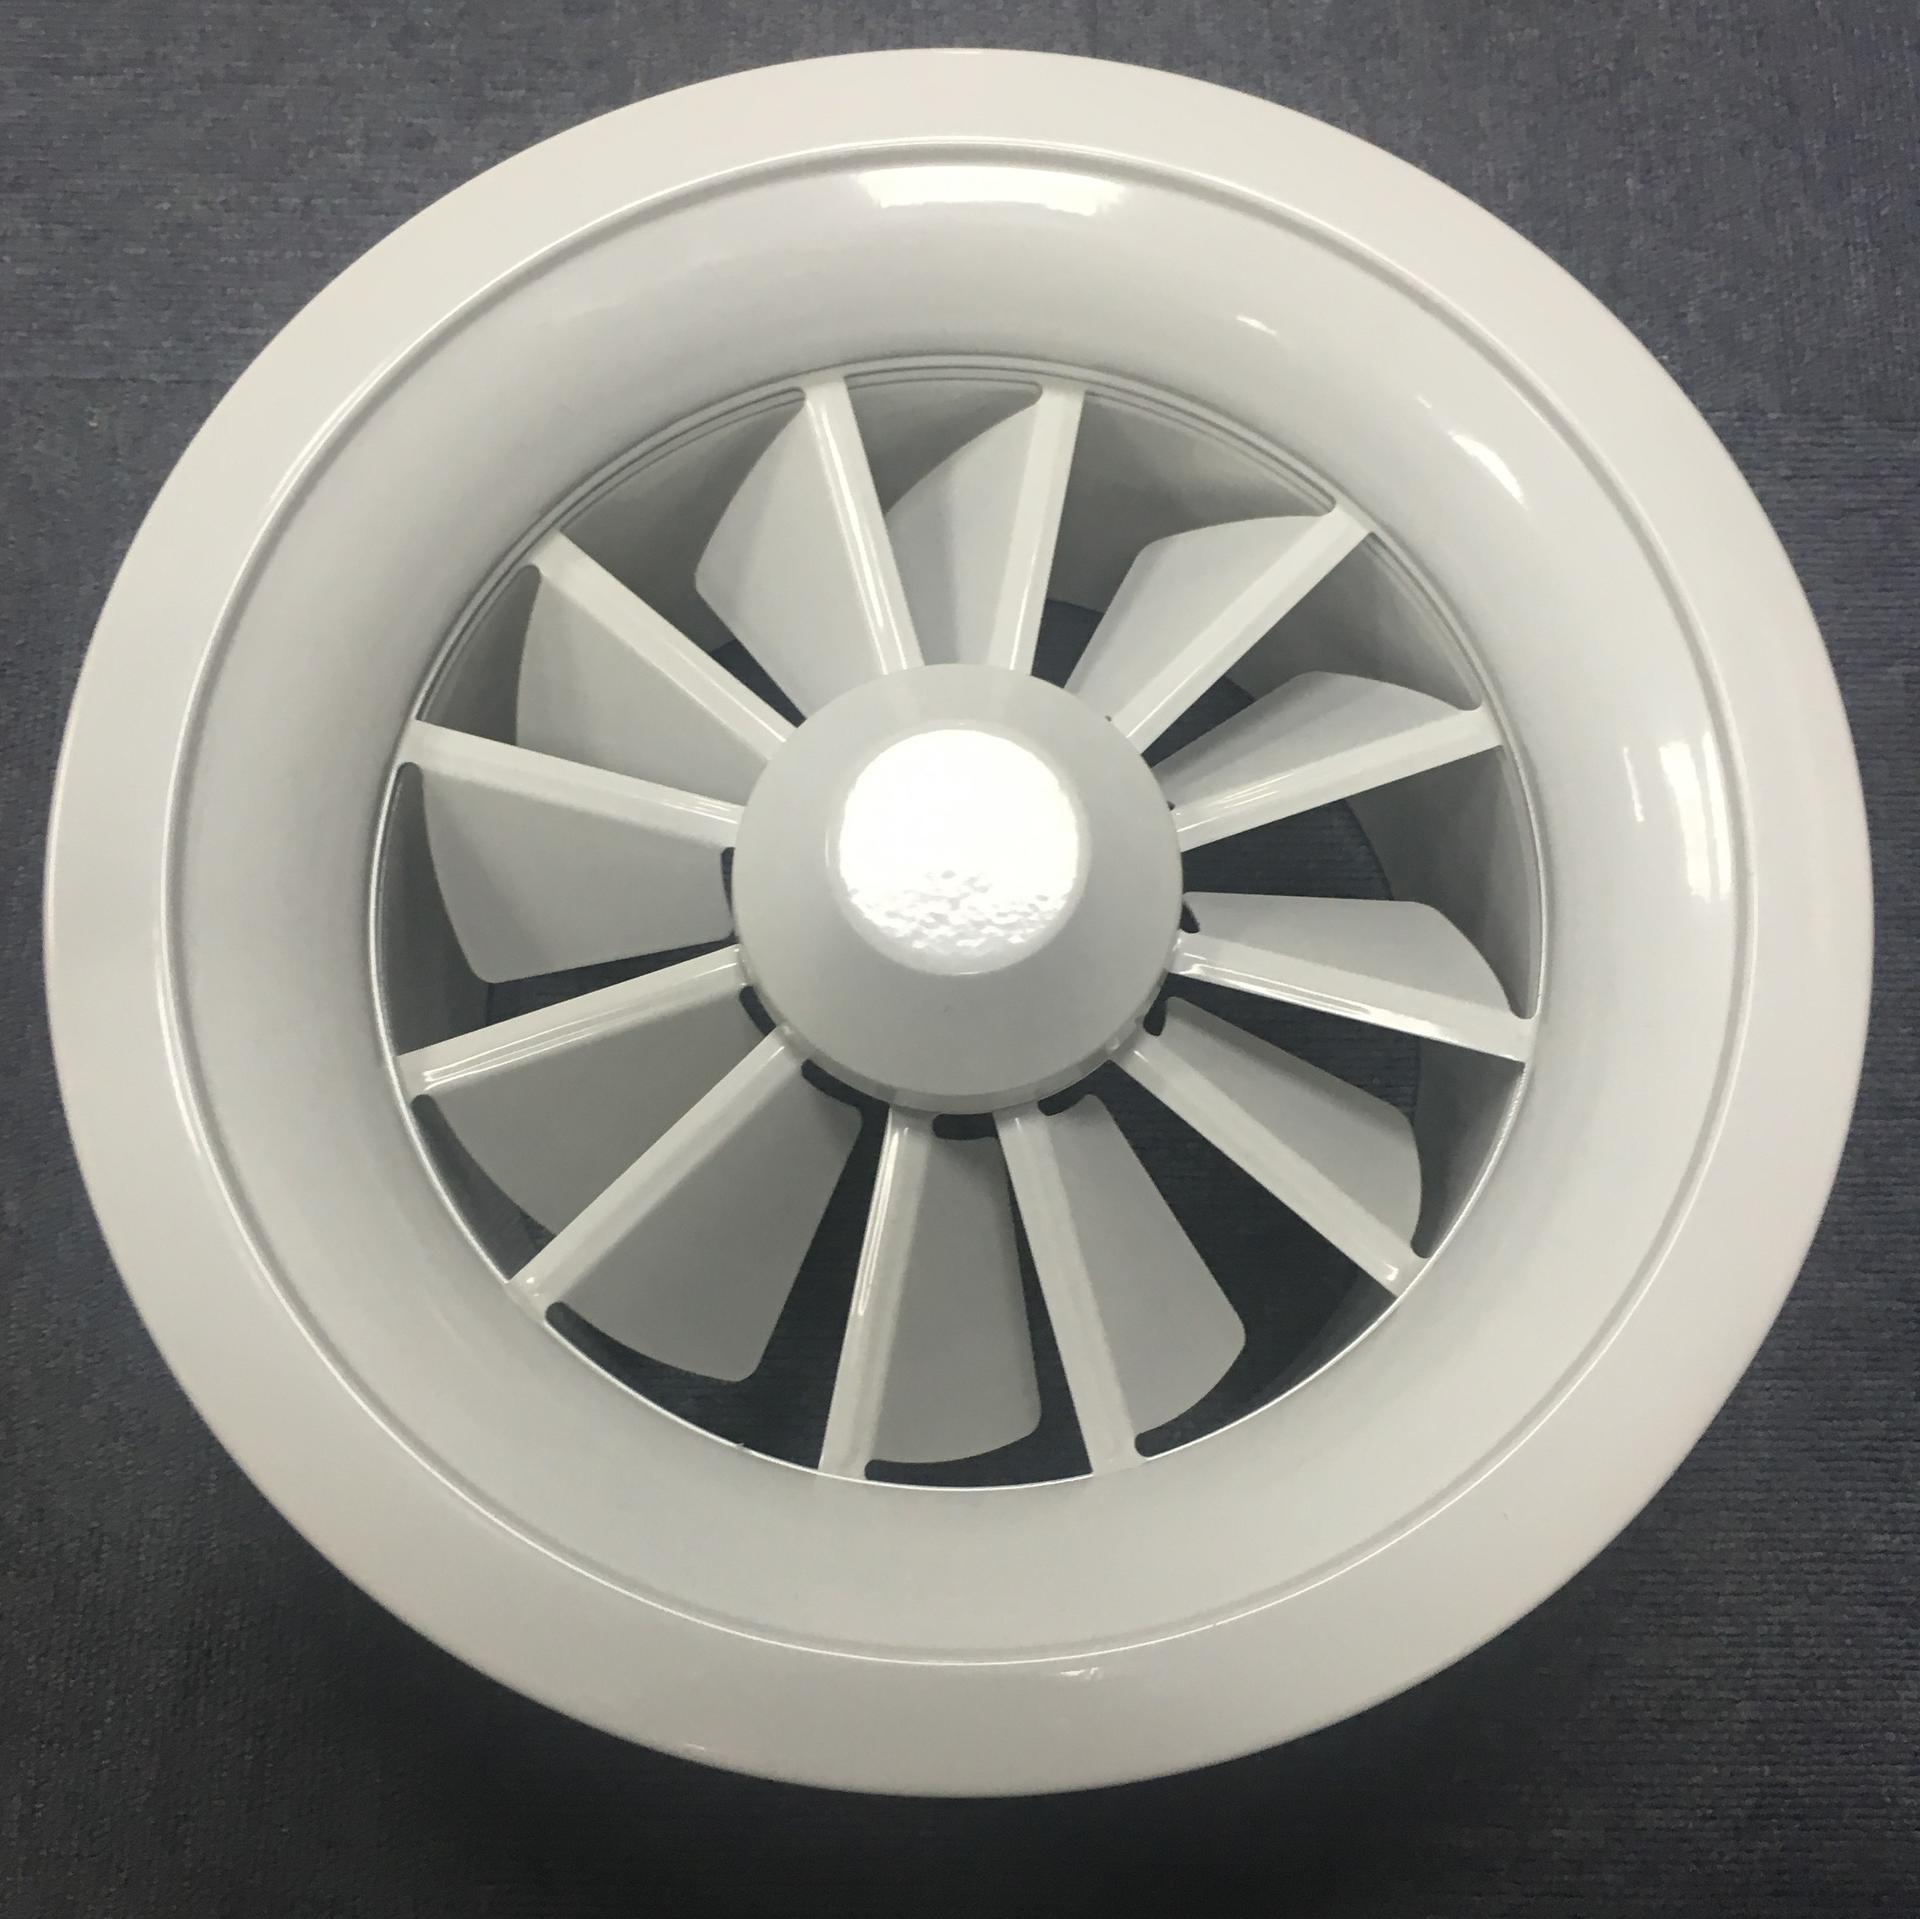 High Quality Aluminum Sheet 1.2mm Thickness Adjustable Round Swirl Diffuser For High Ceilings